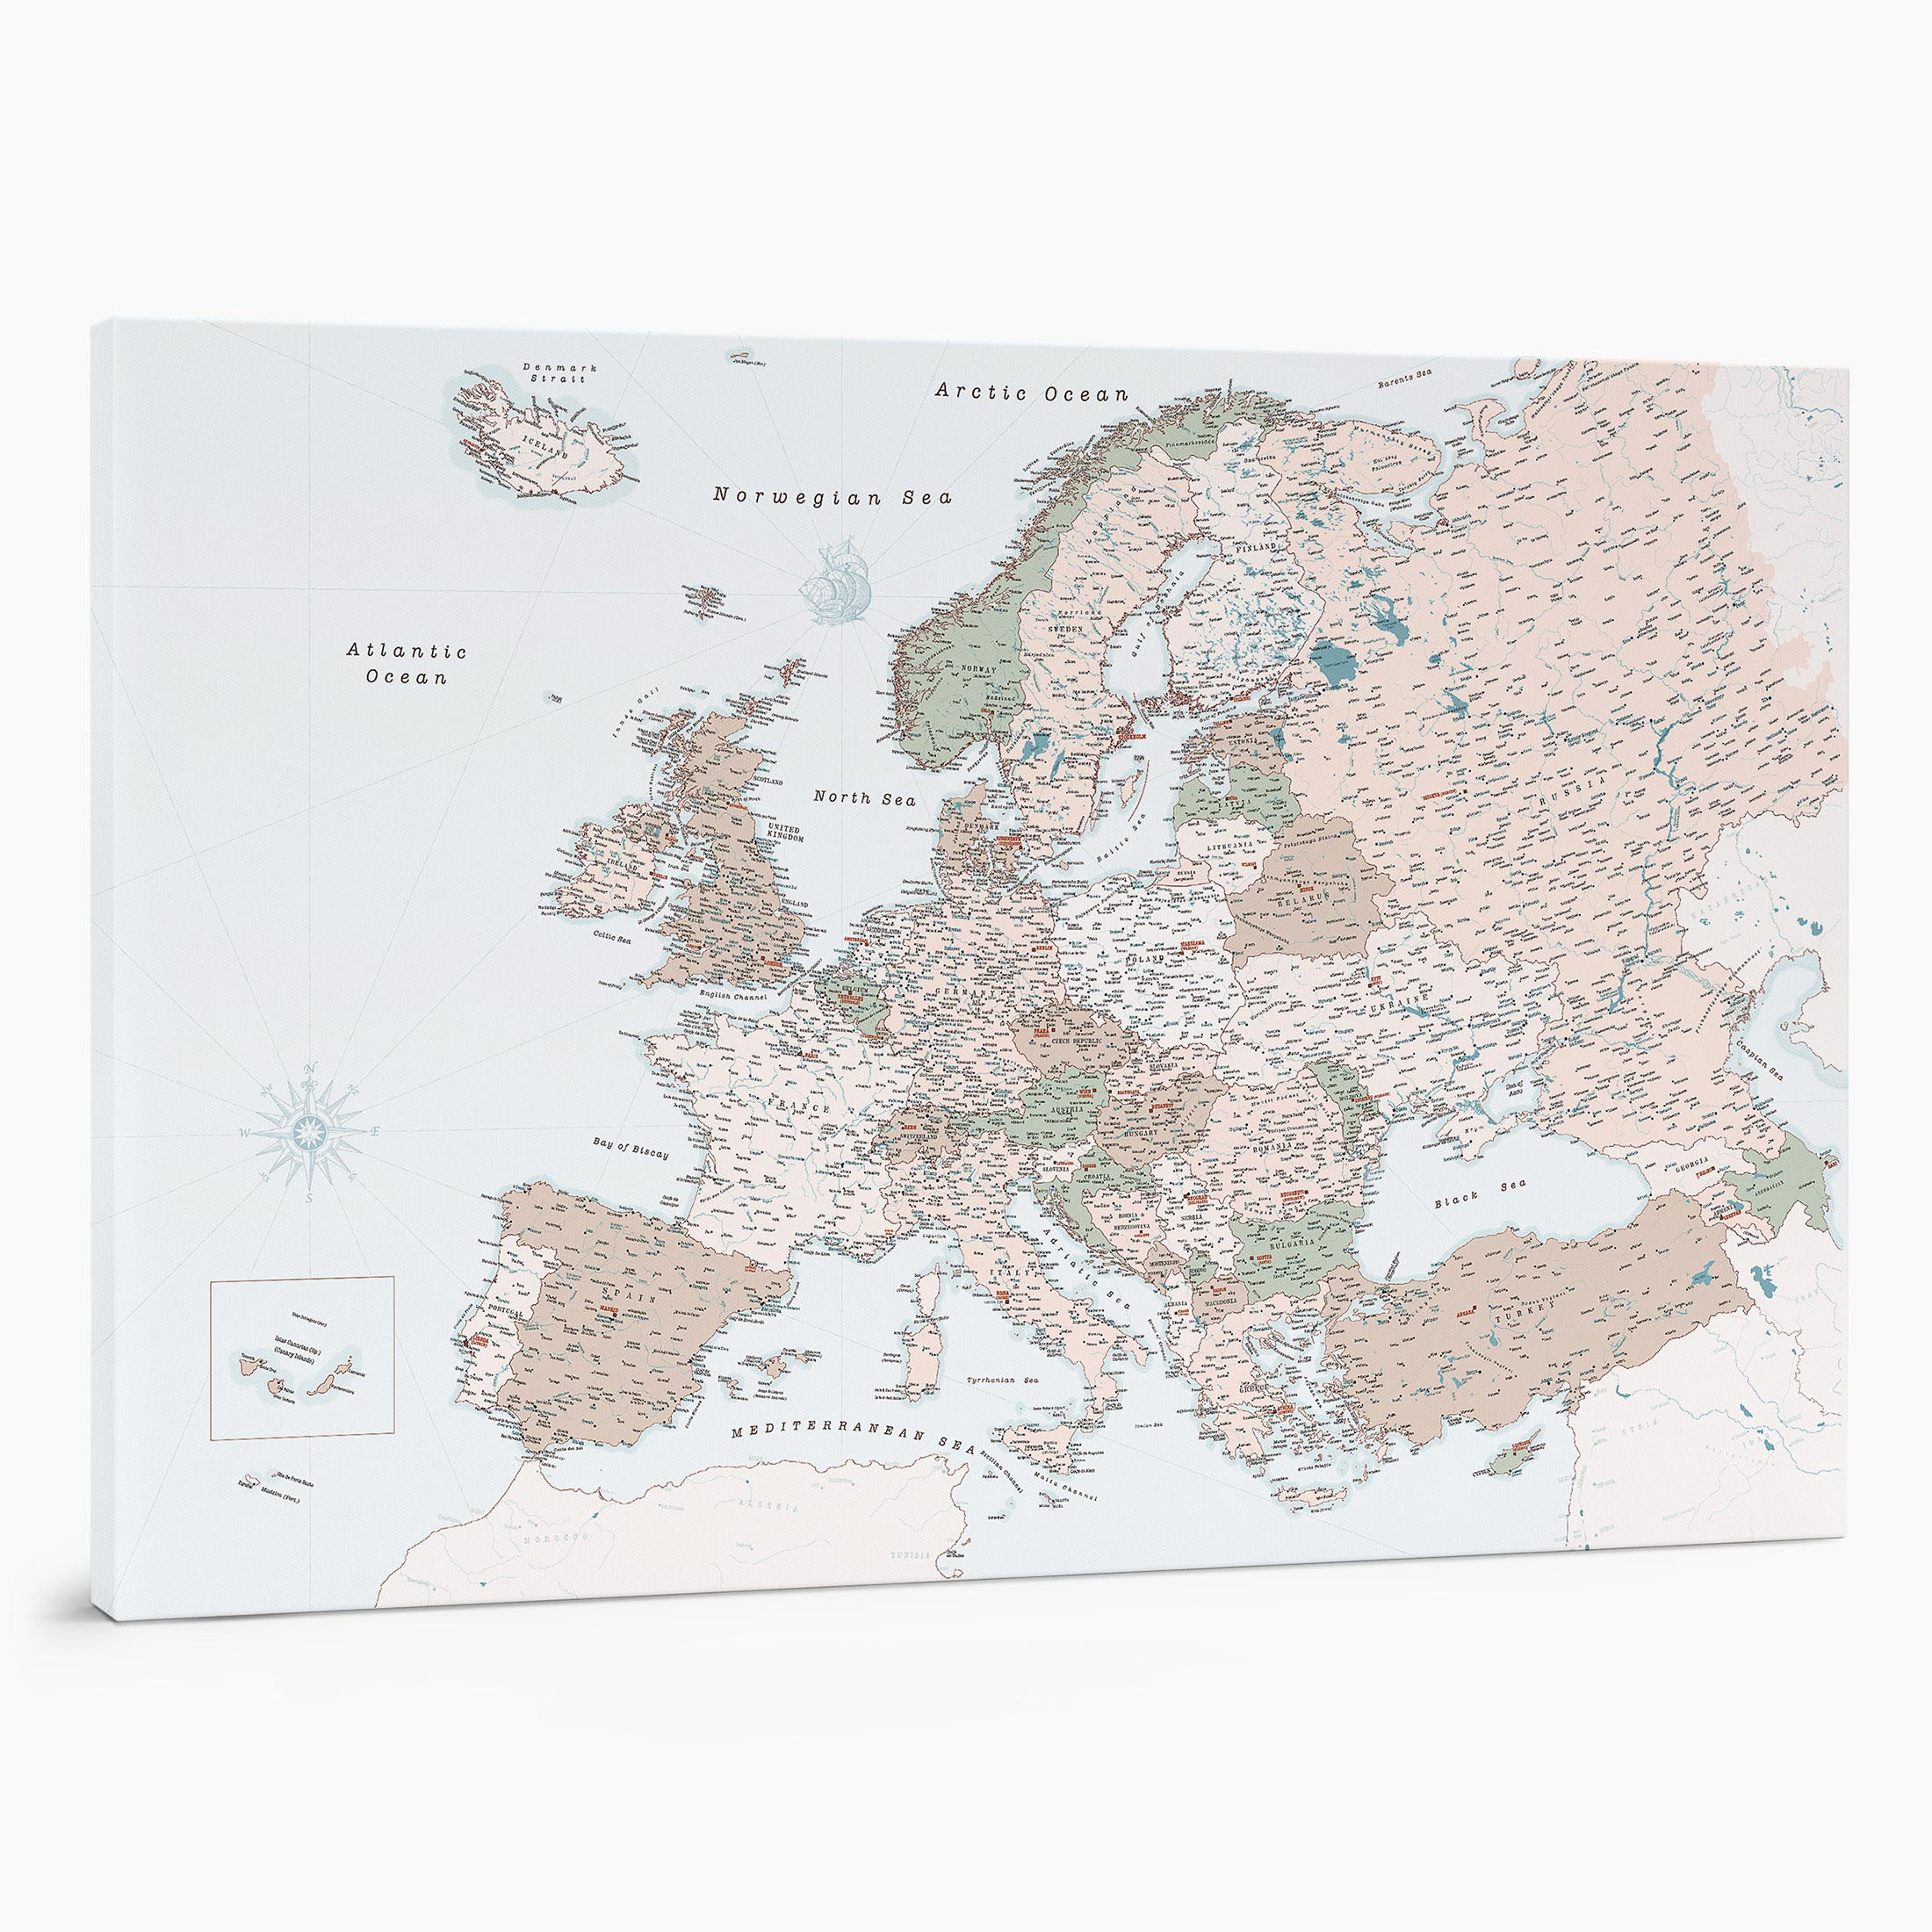 8EU large push pin europe map to track places visited on canvas retro